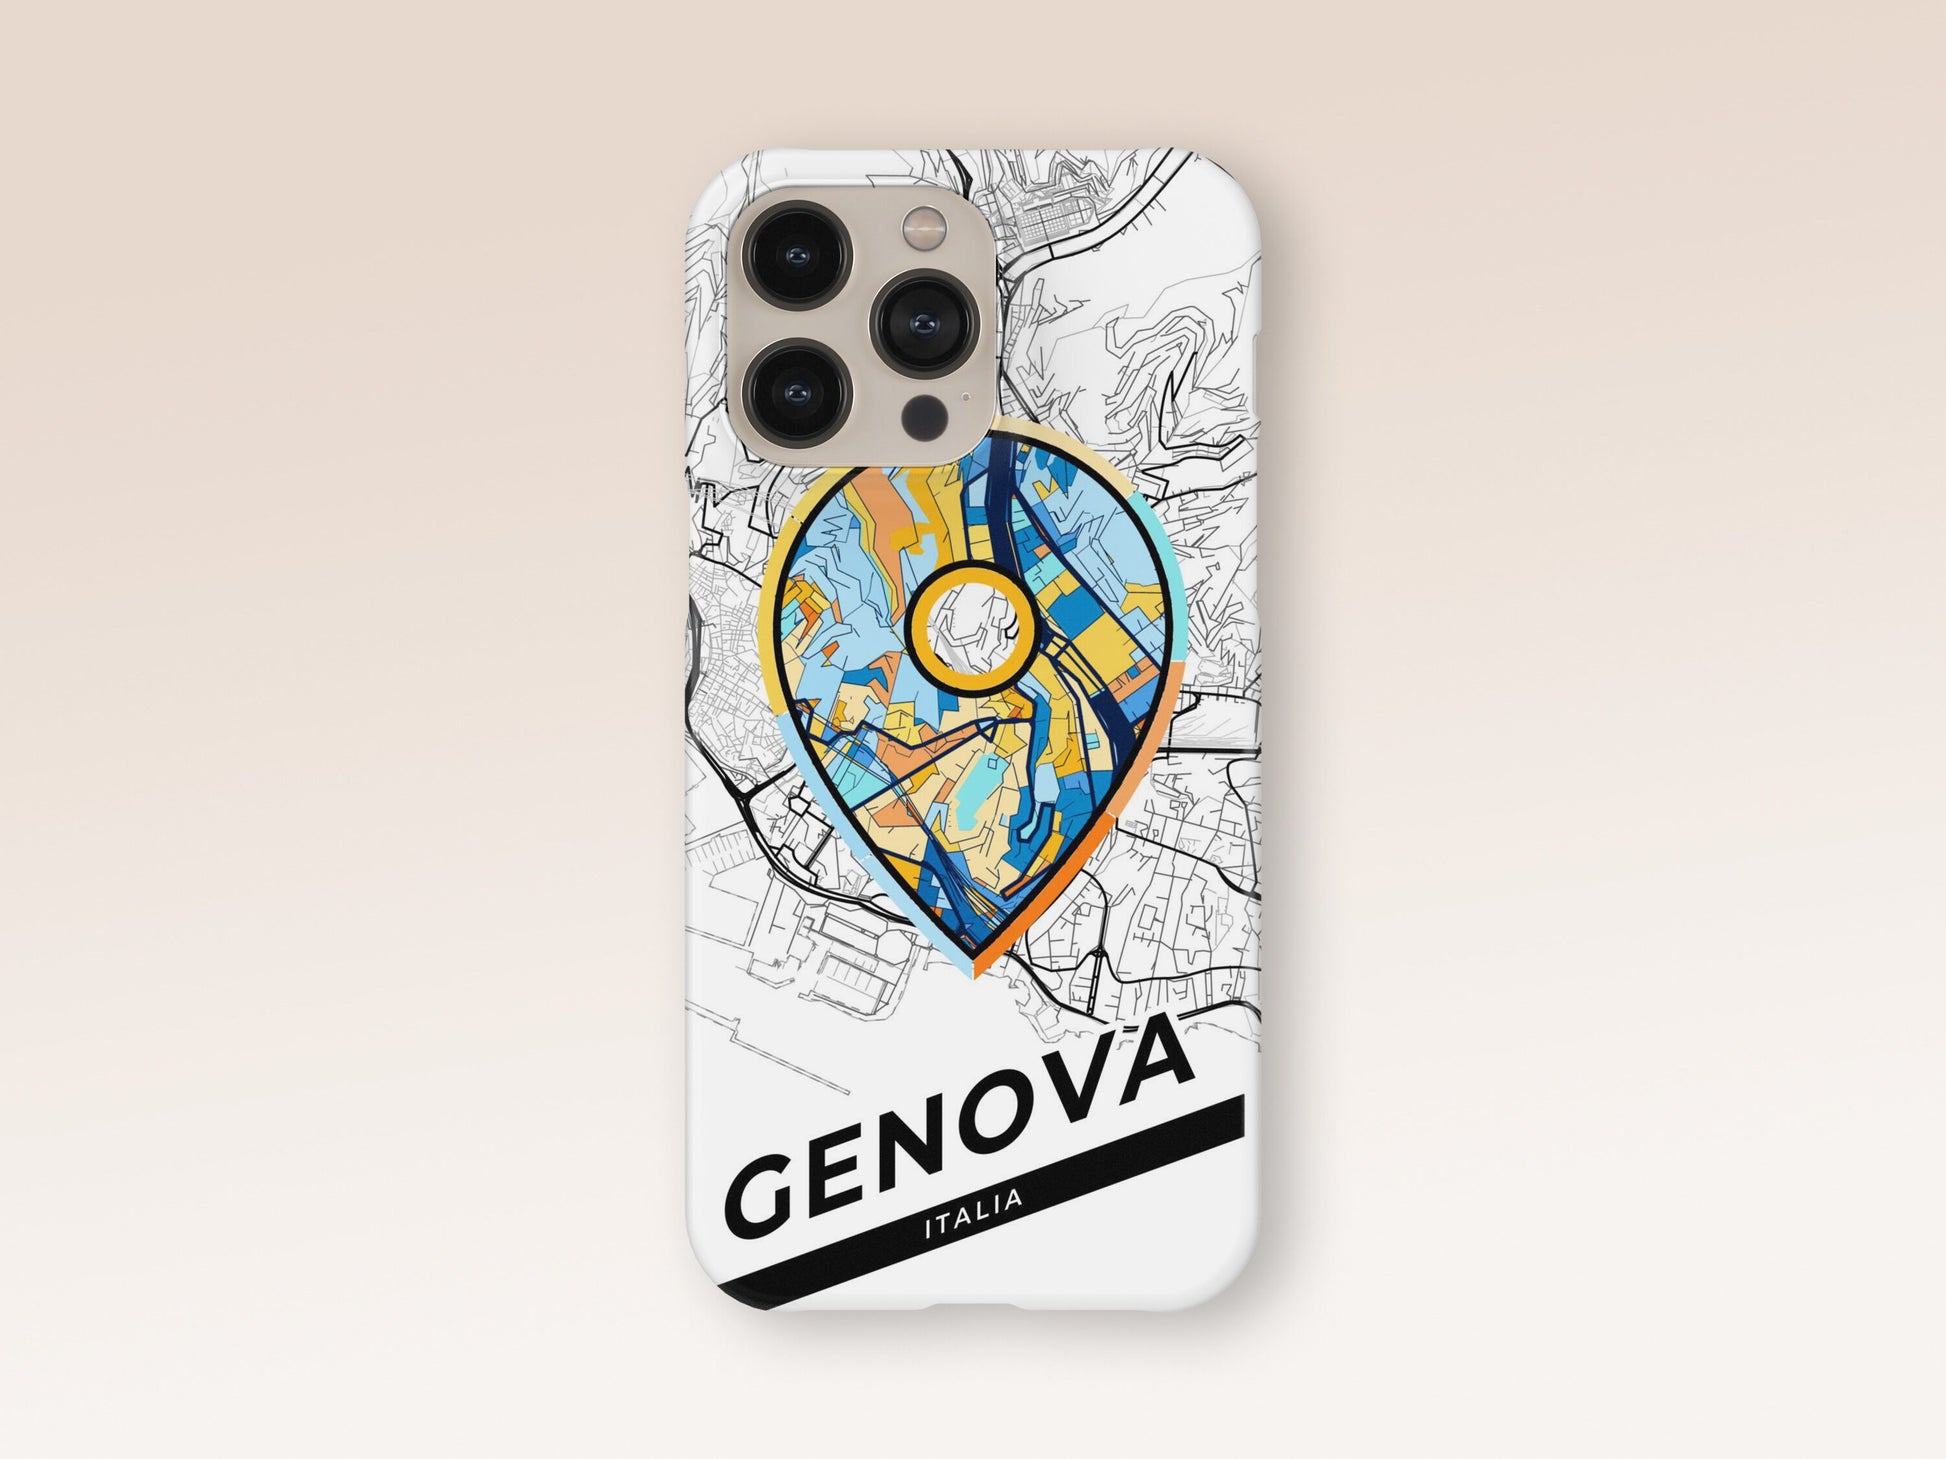 Genoa Italy slim phone case with colorful icon. Birthday, wedding or housewarming gift. Couple match cases. 1